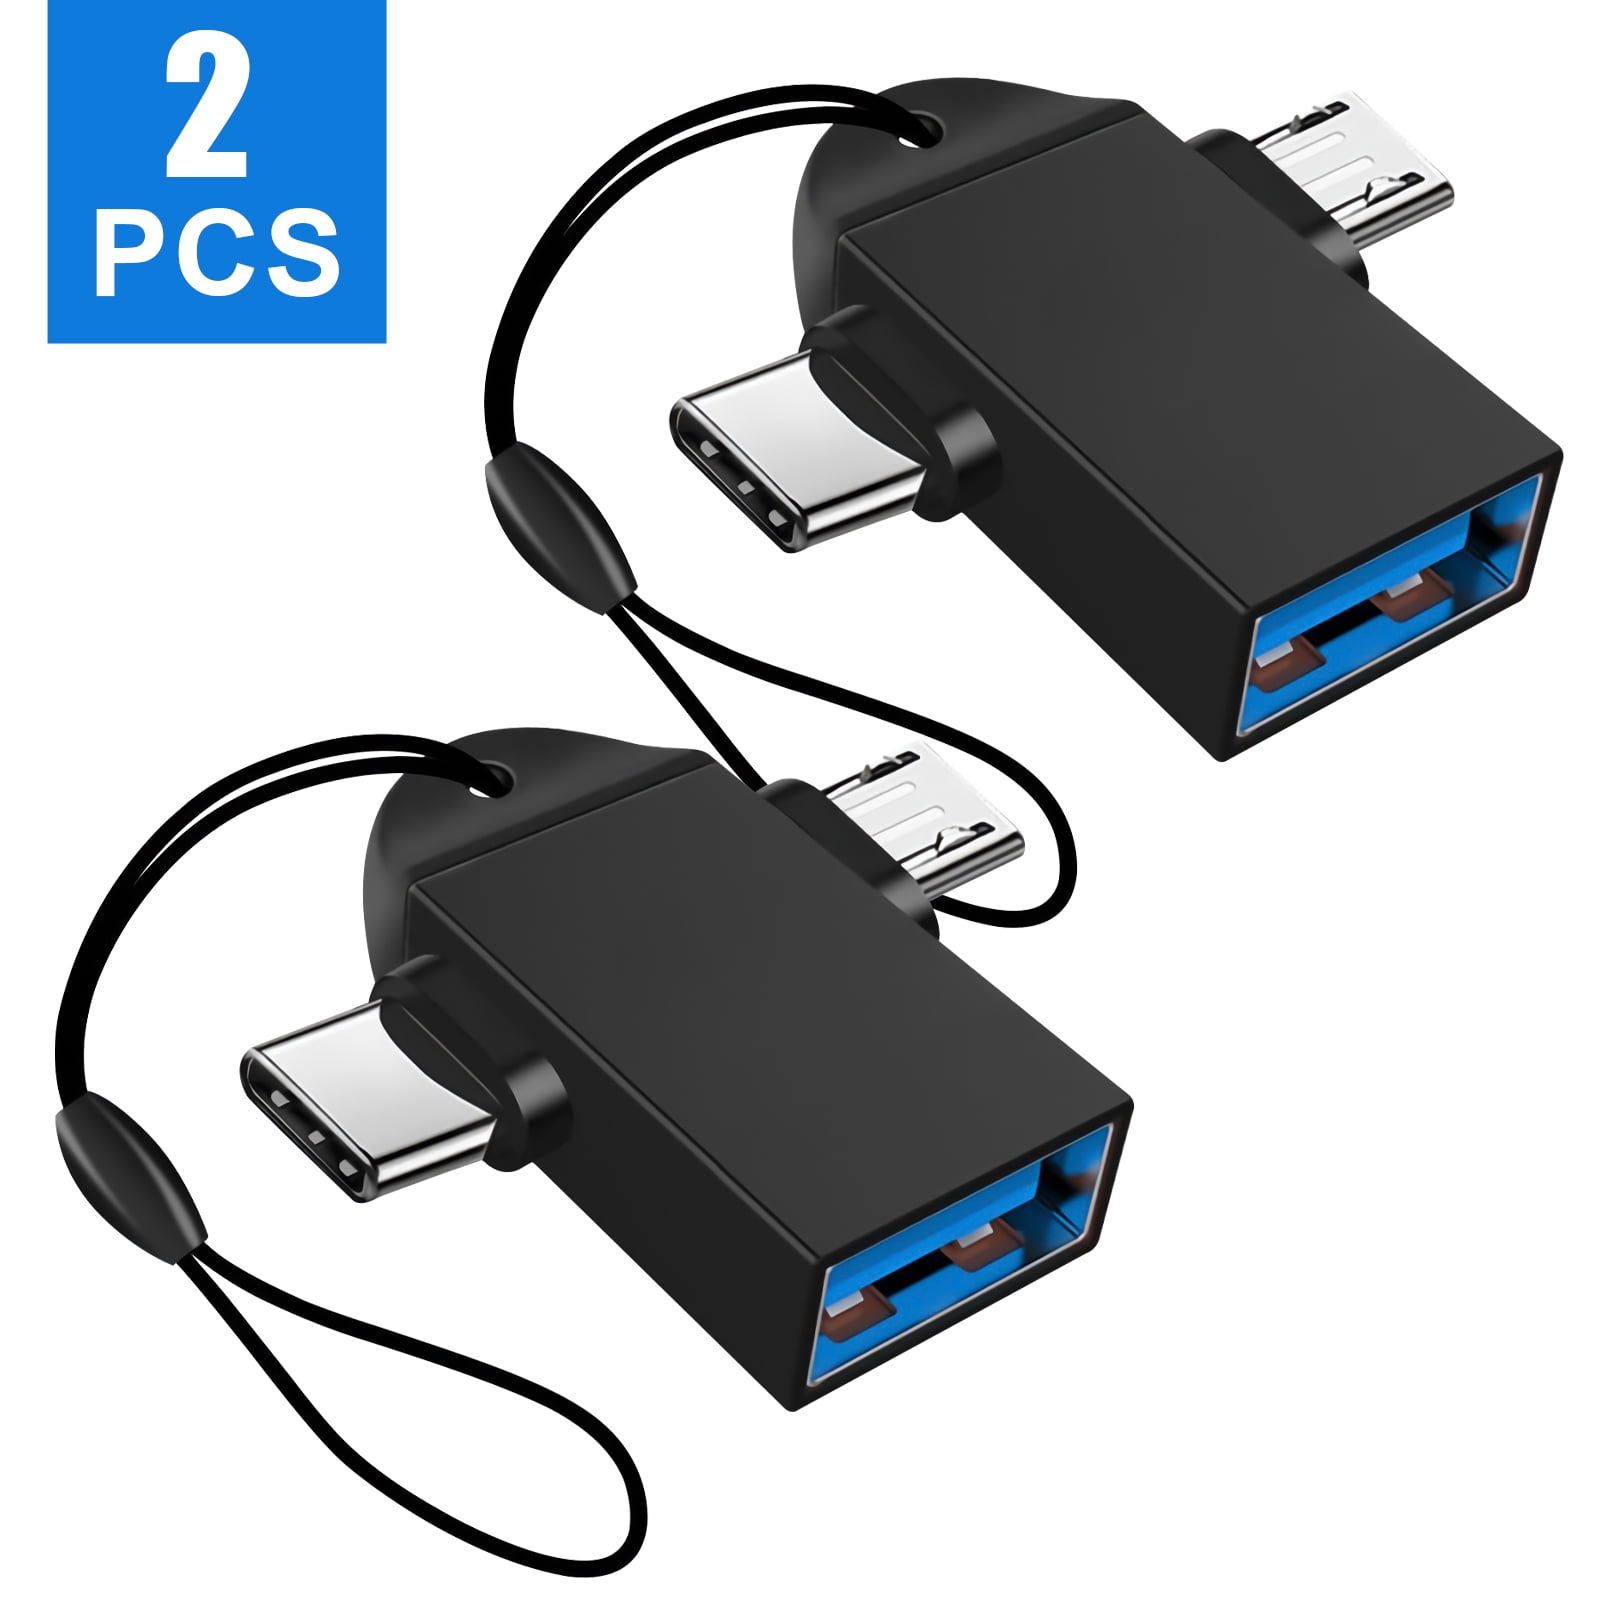 TSV OTG Adapter, 2-in-1 USB 3.0 Female to Type C + Micro USB Male OTG  Converter Cable Compatible with Media TV Sticks, Mobile Phones or Tablets, 2  Pack 